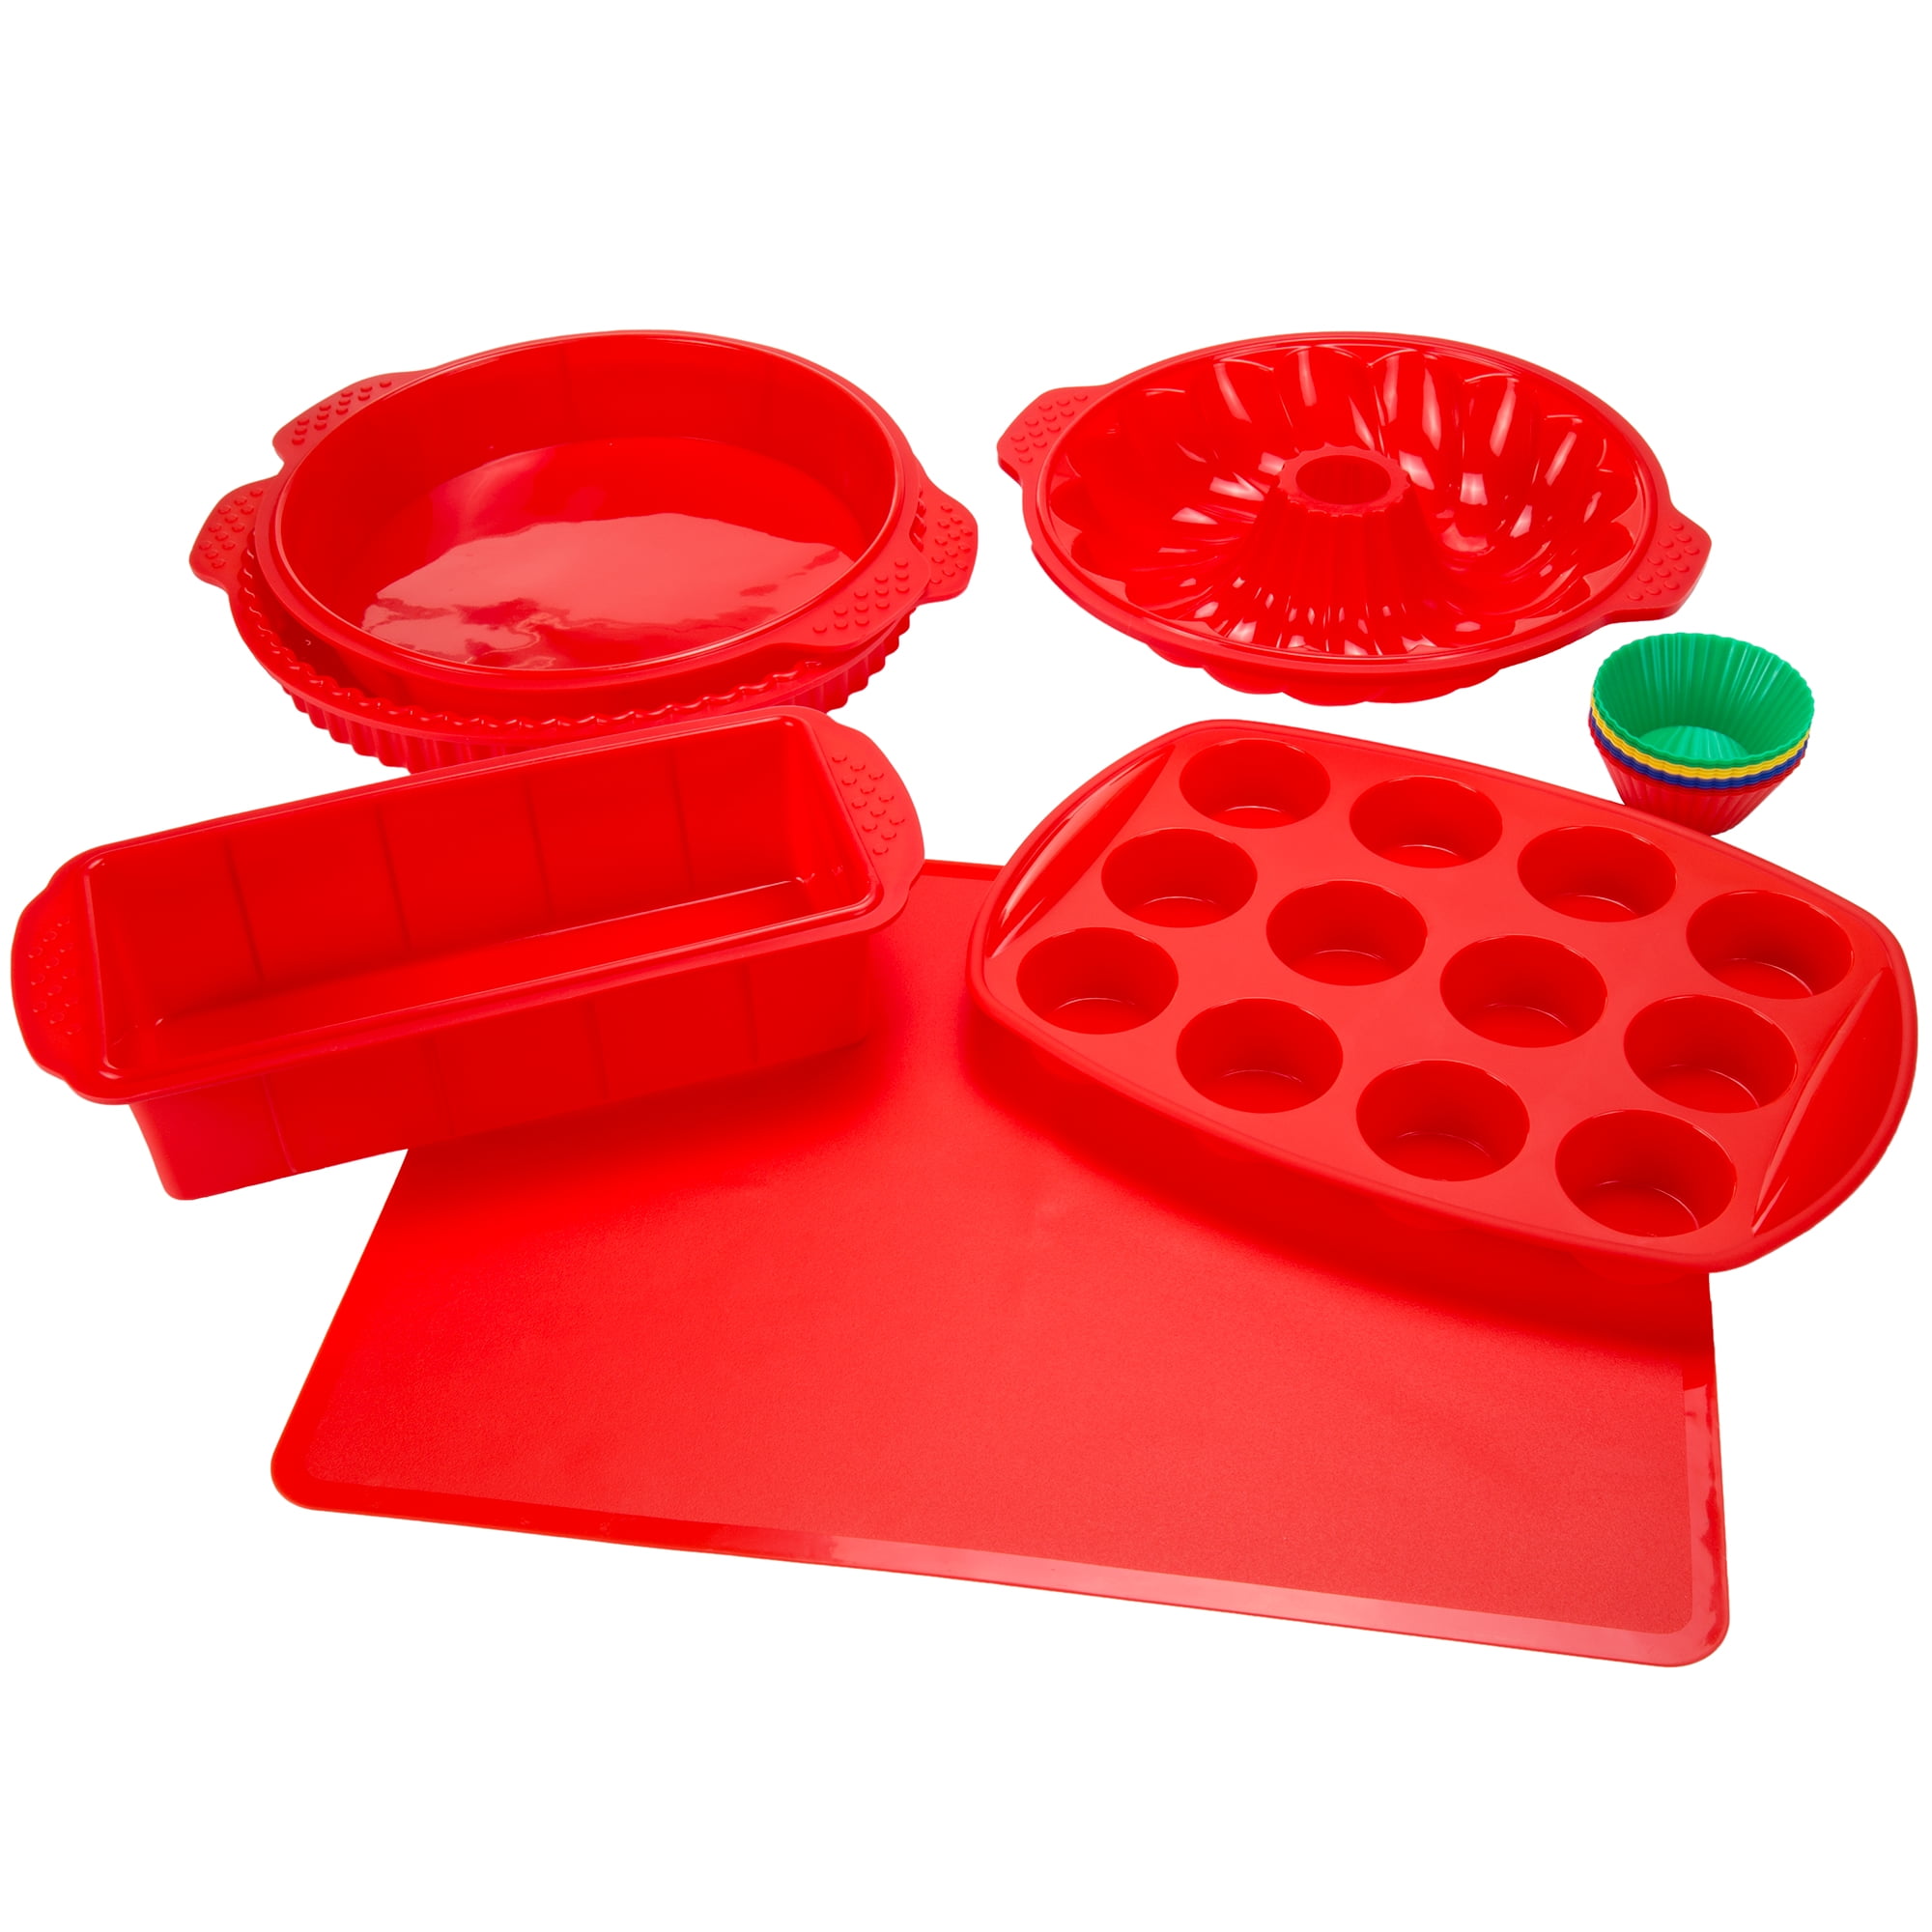 Double-sided Silicone Oil Round Baking Utensil Mold Non-stick Greaseproof Paper 